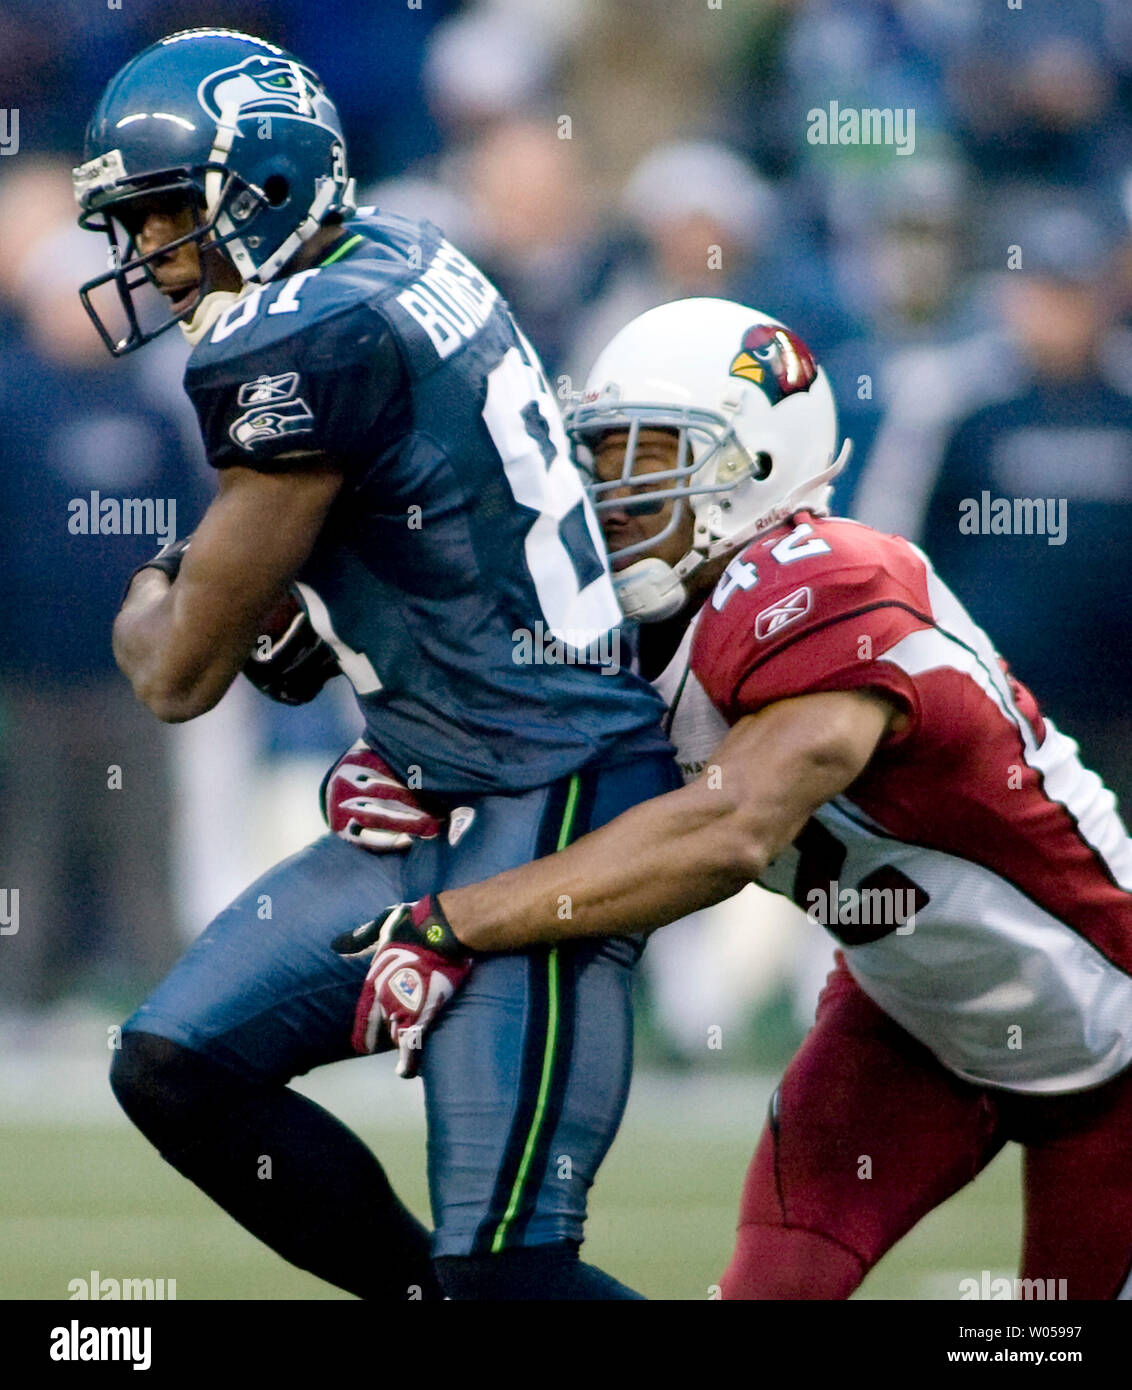 Seattle Seahawks' wide receiver Nate Burleson is tackled by